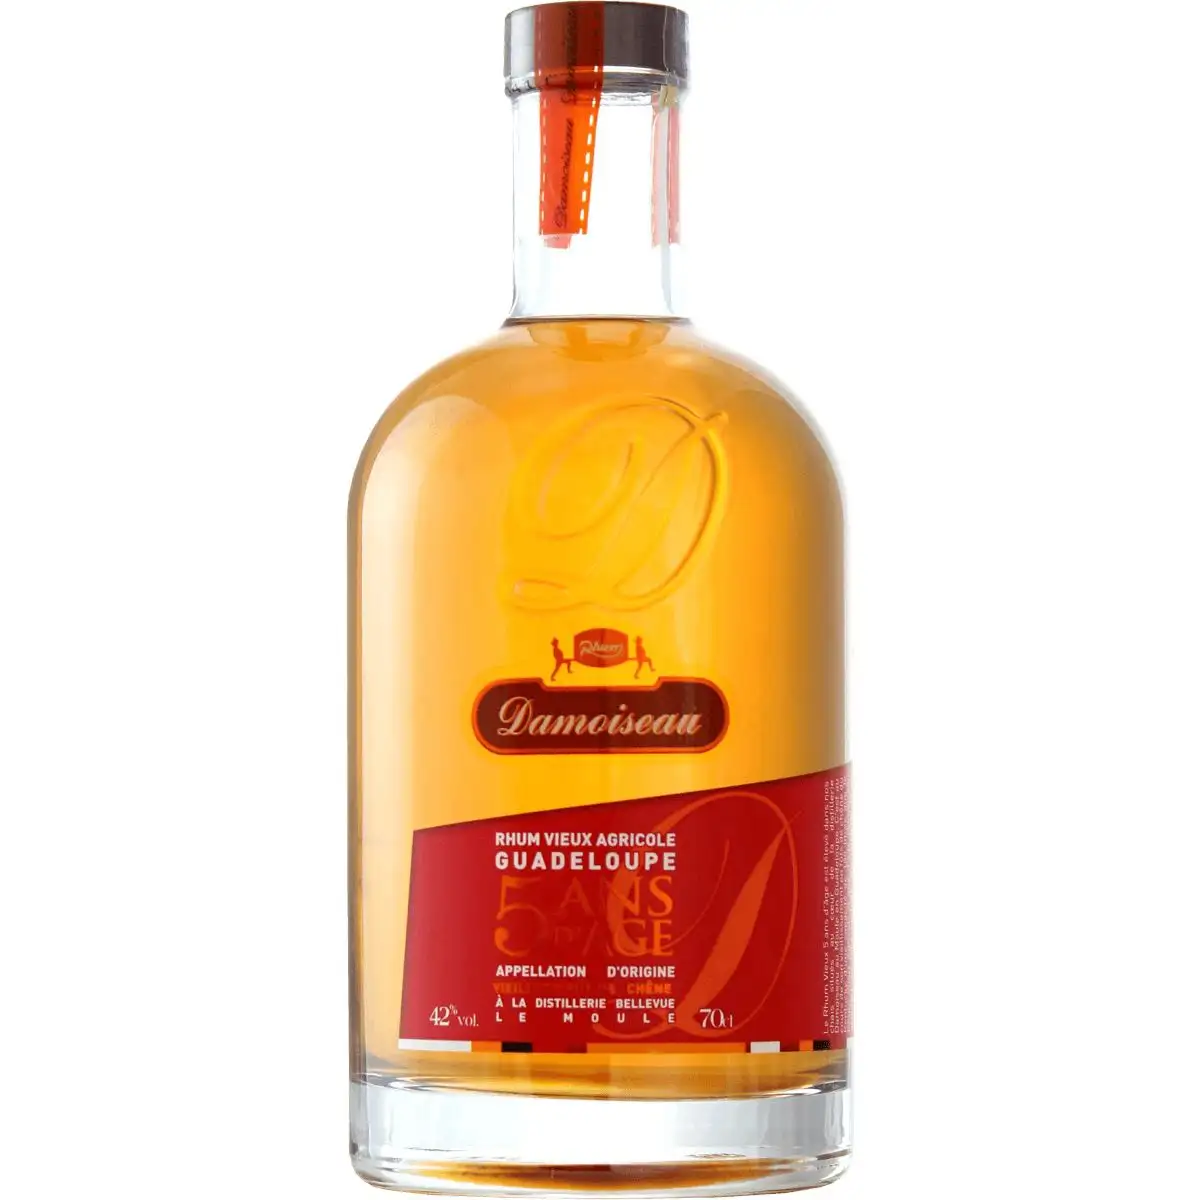 Image of the front of the bottle of the rum Rhum Vieux Agricole Guadeloupe 5 Ans d‘Age